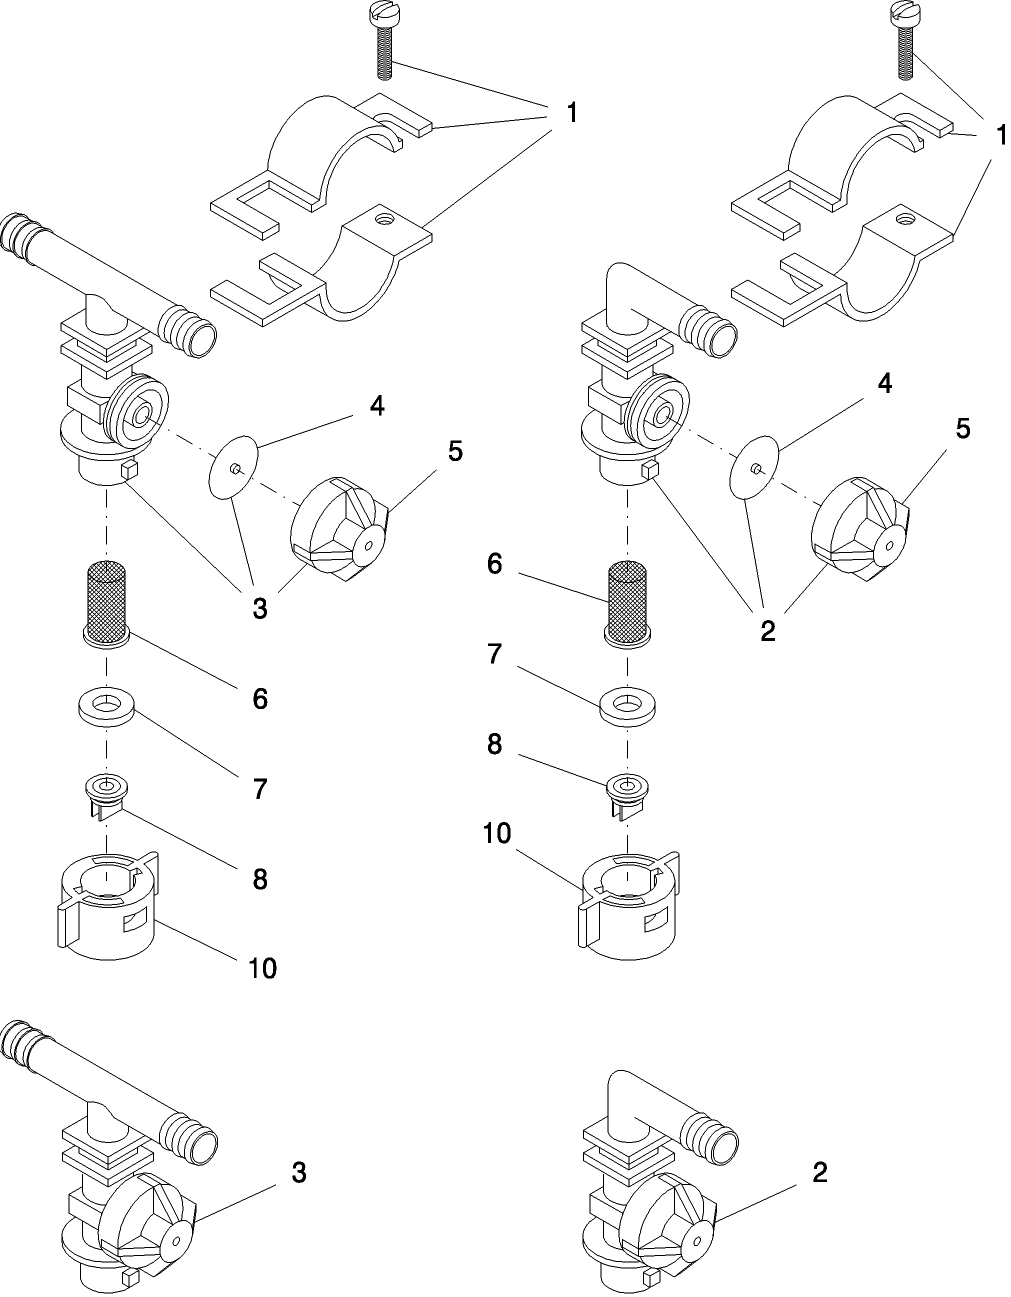 12.030.1 DRY BOOM SINGLE NOZZLE ASSEMBLY